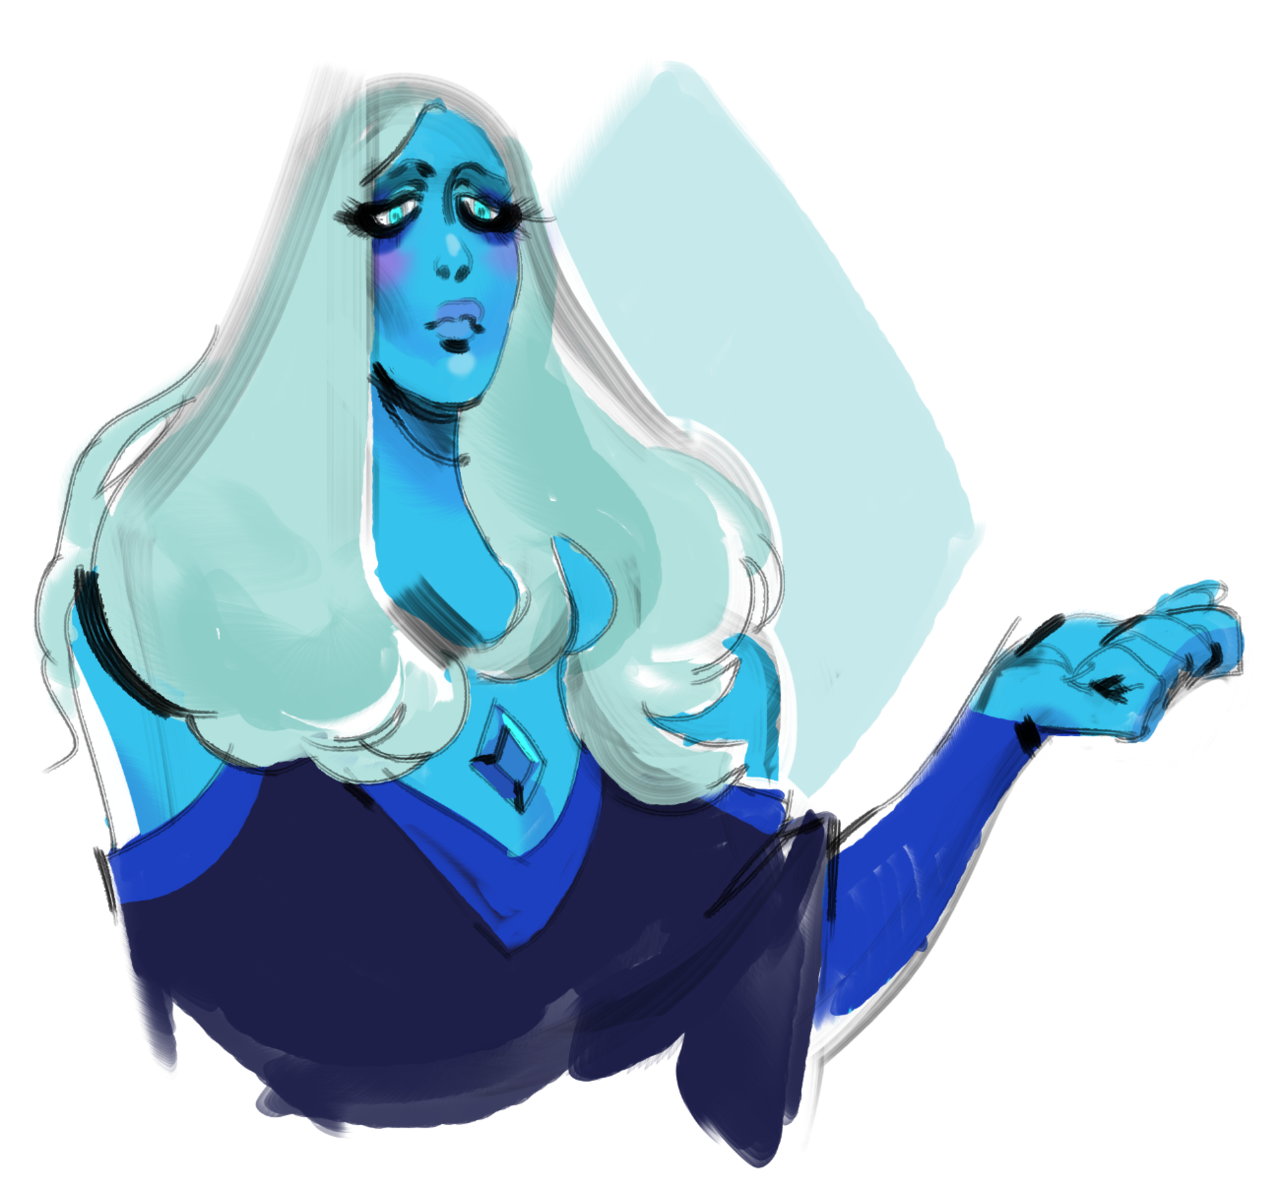 well… diamonds are forever, babey